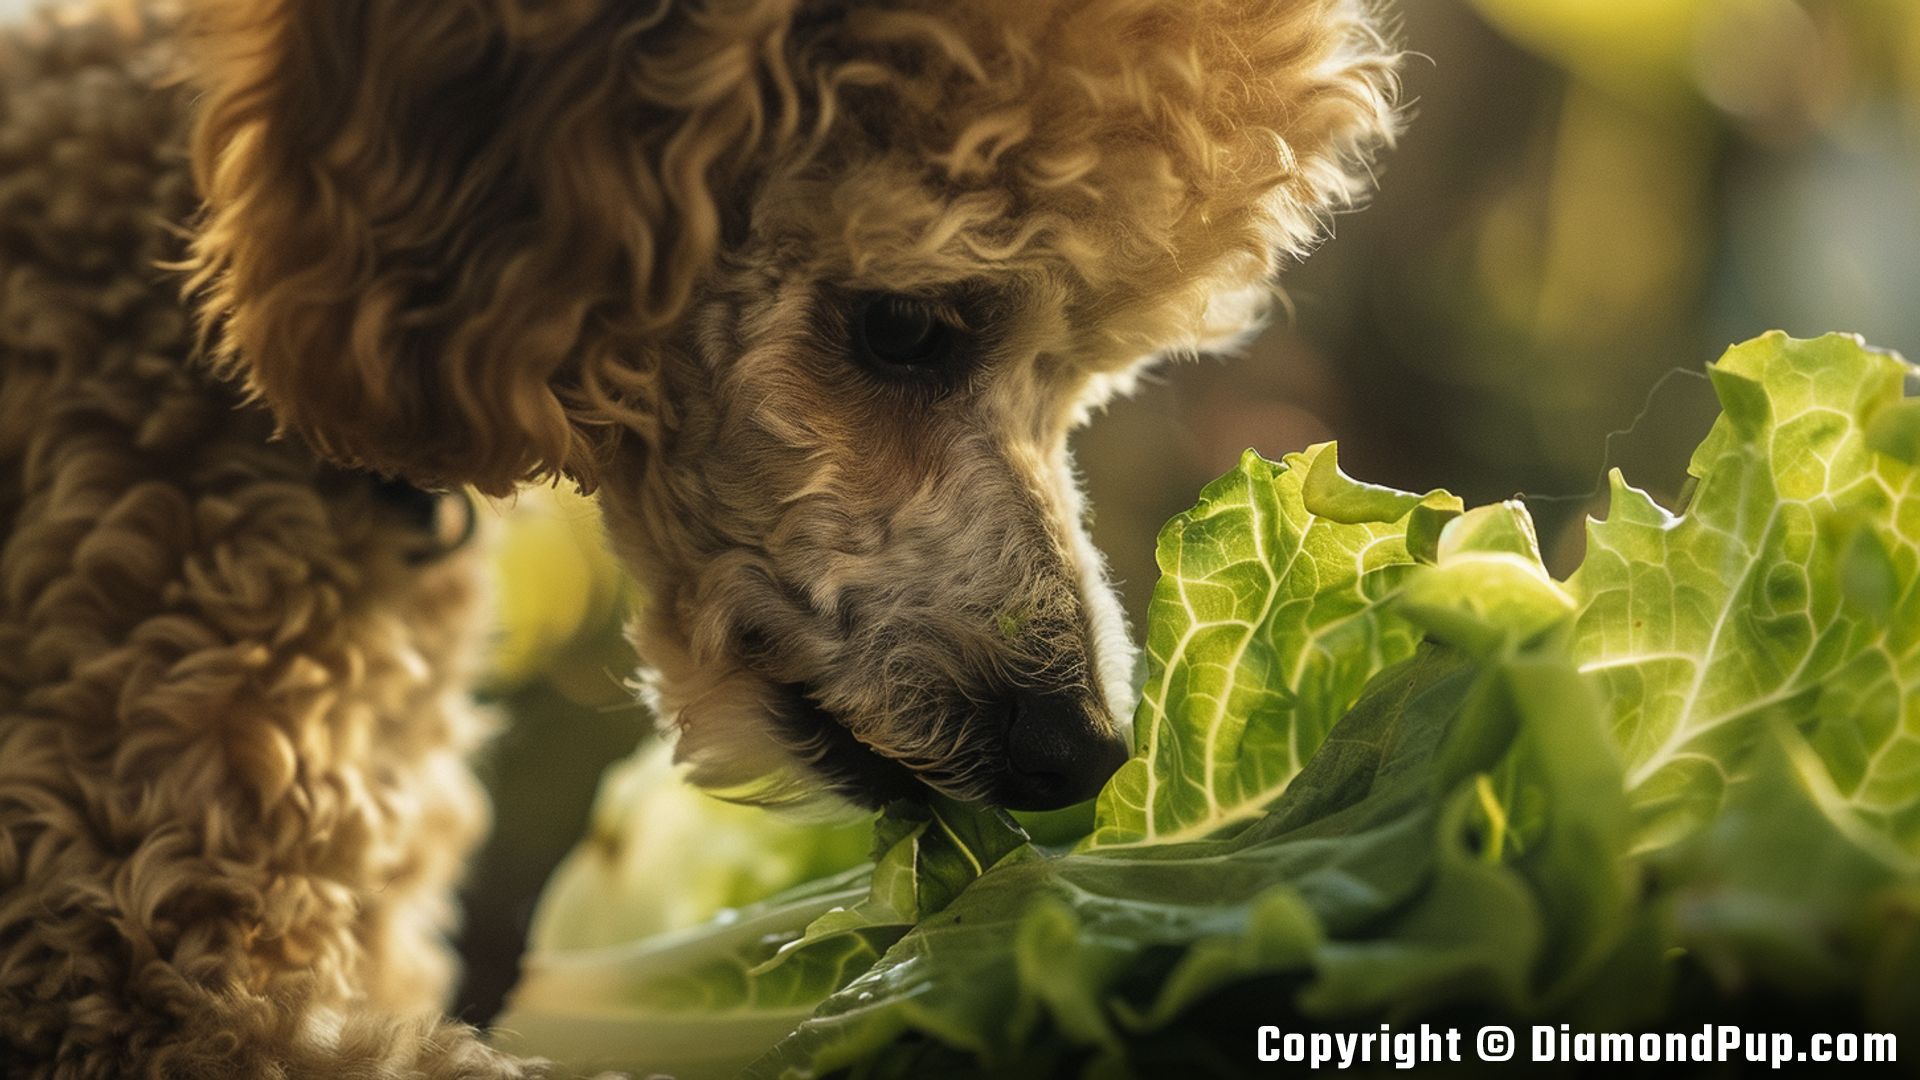 Image of a Playful Poodle Snacking on Lettuce